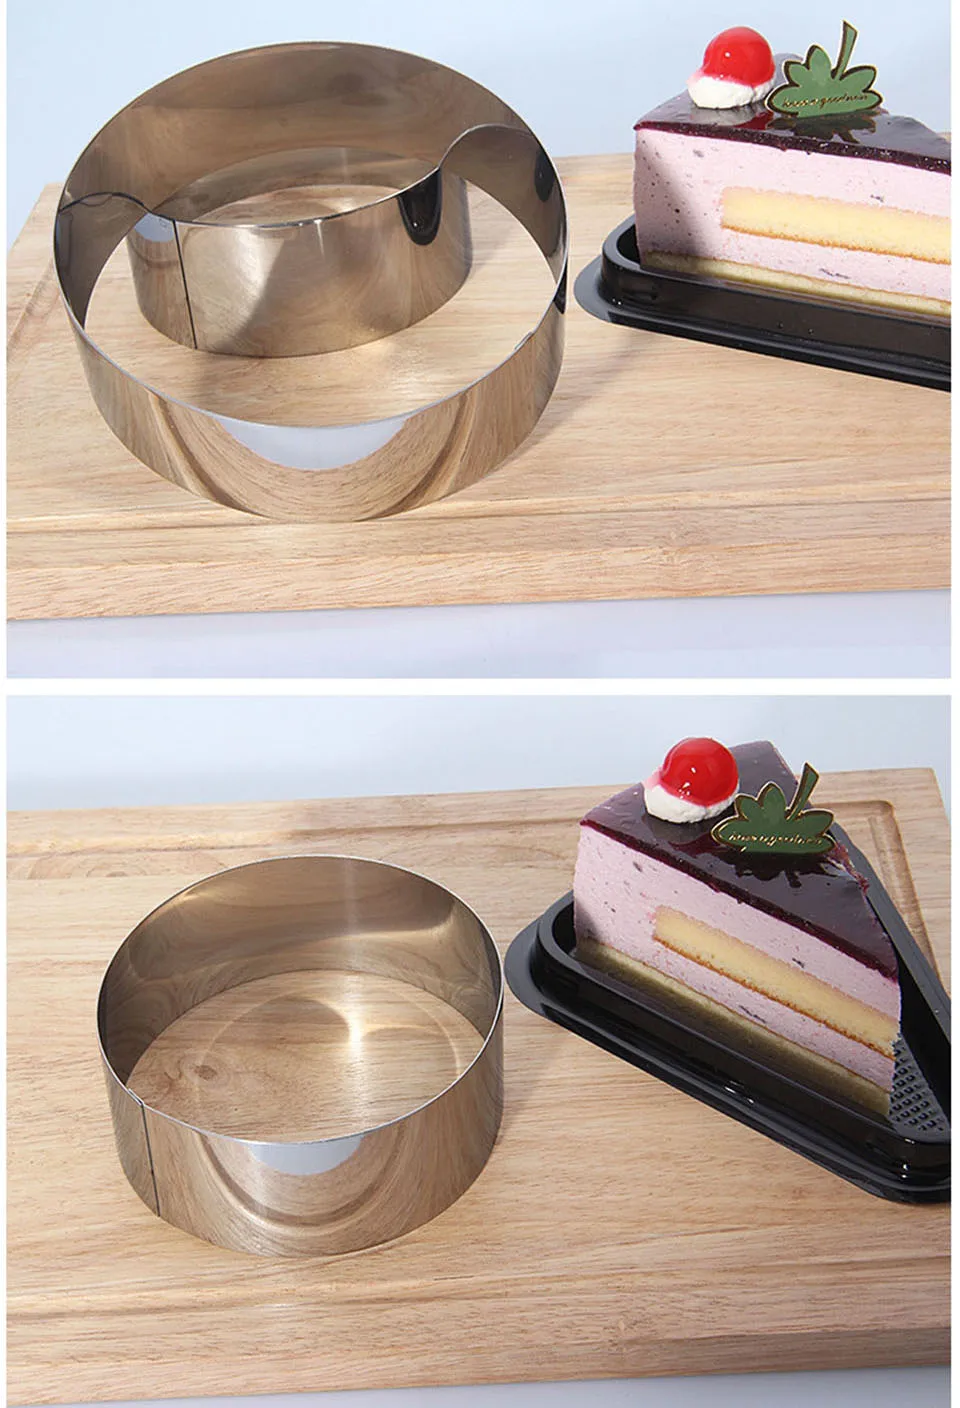 Transhome Mousse Cake Ring 6Pcs Stainless Steel Mousse Mold Cake Mold For Baking Mousse Cake Baking Pastry Tools Bakeware Tools